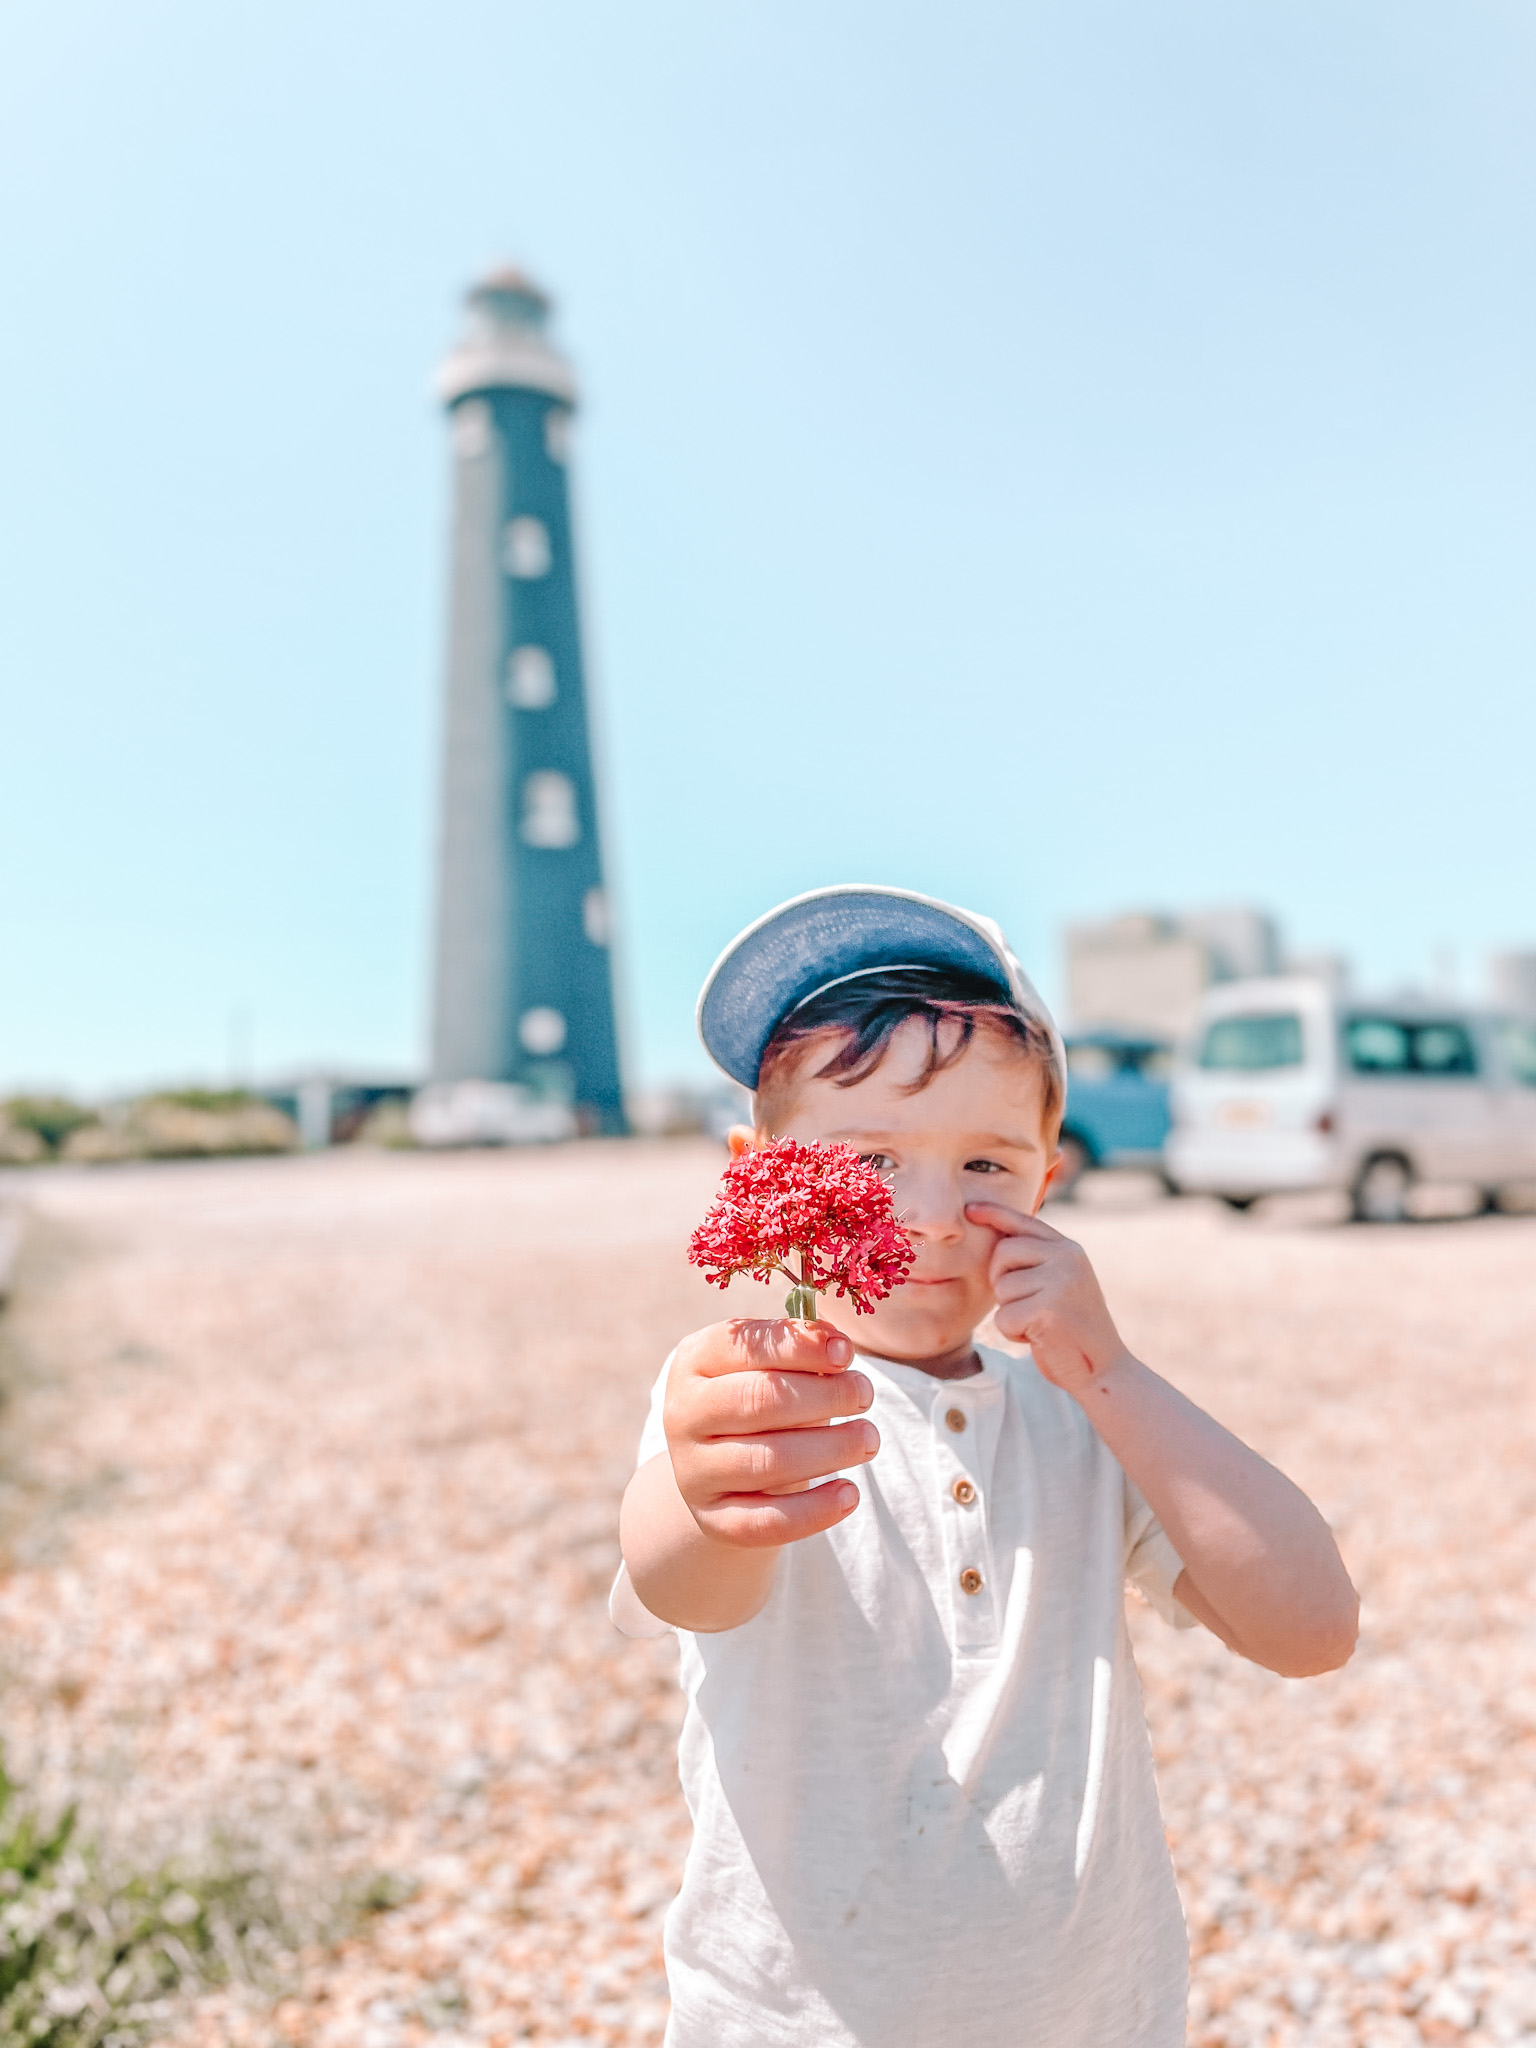 Max in front of Dungeness lighthouse